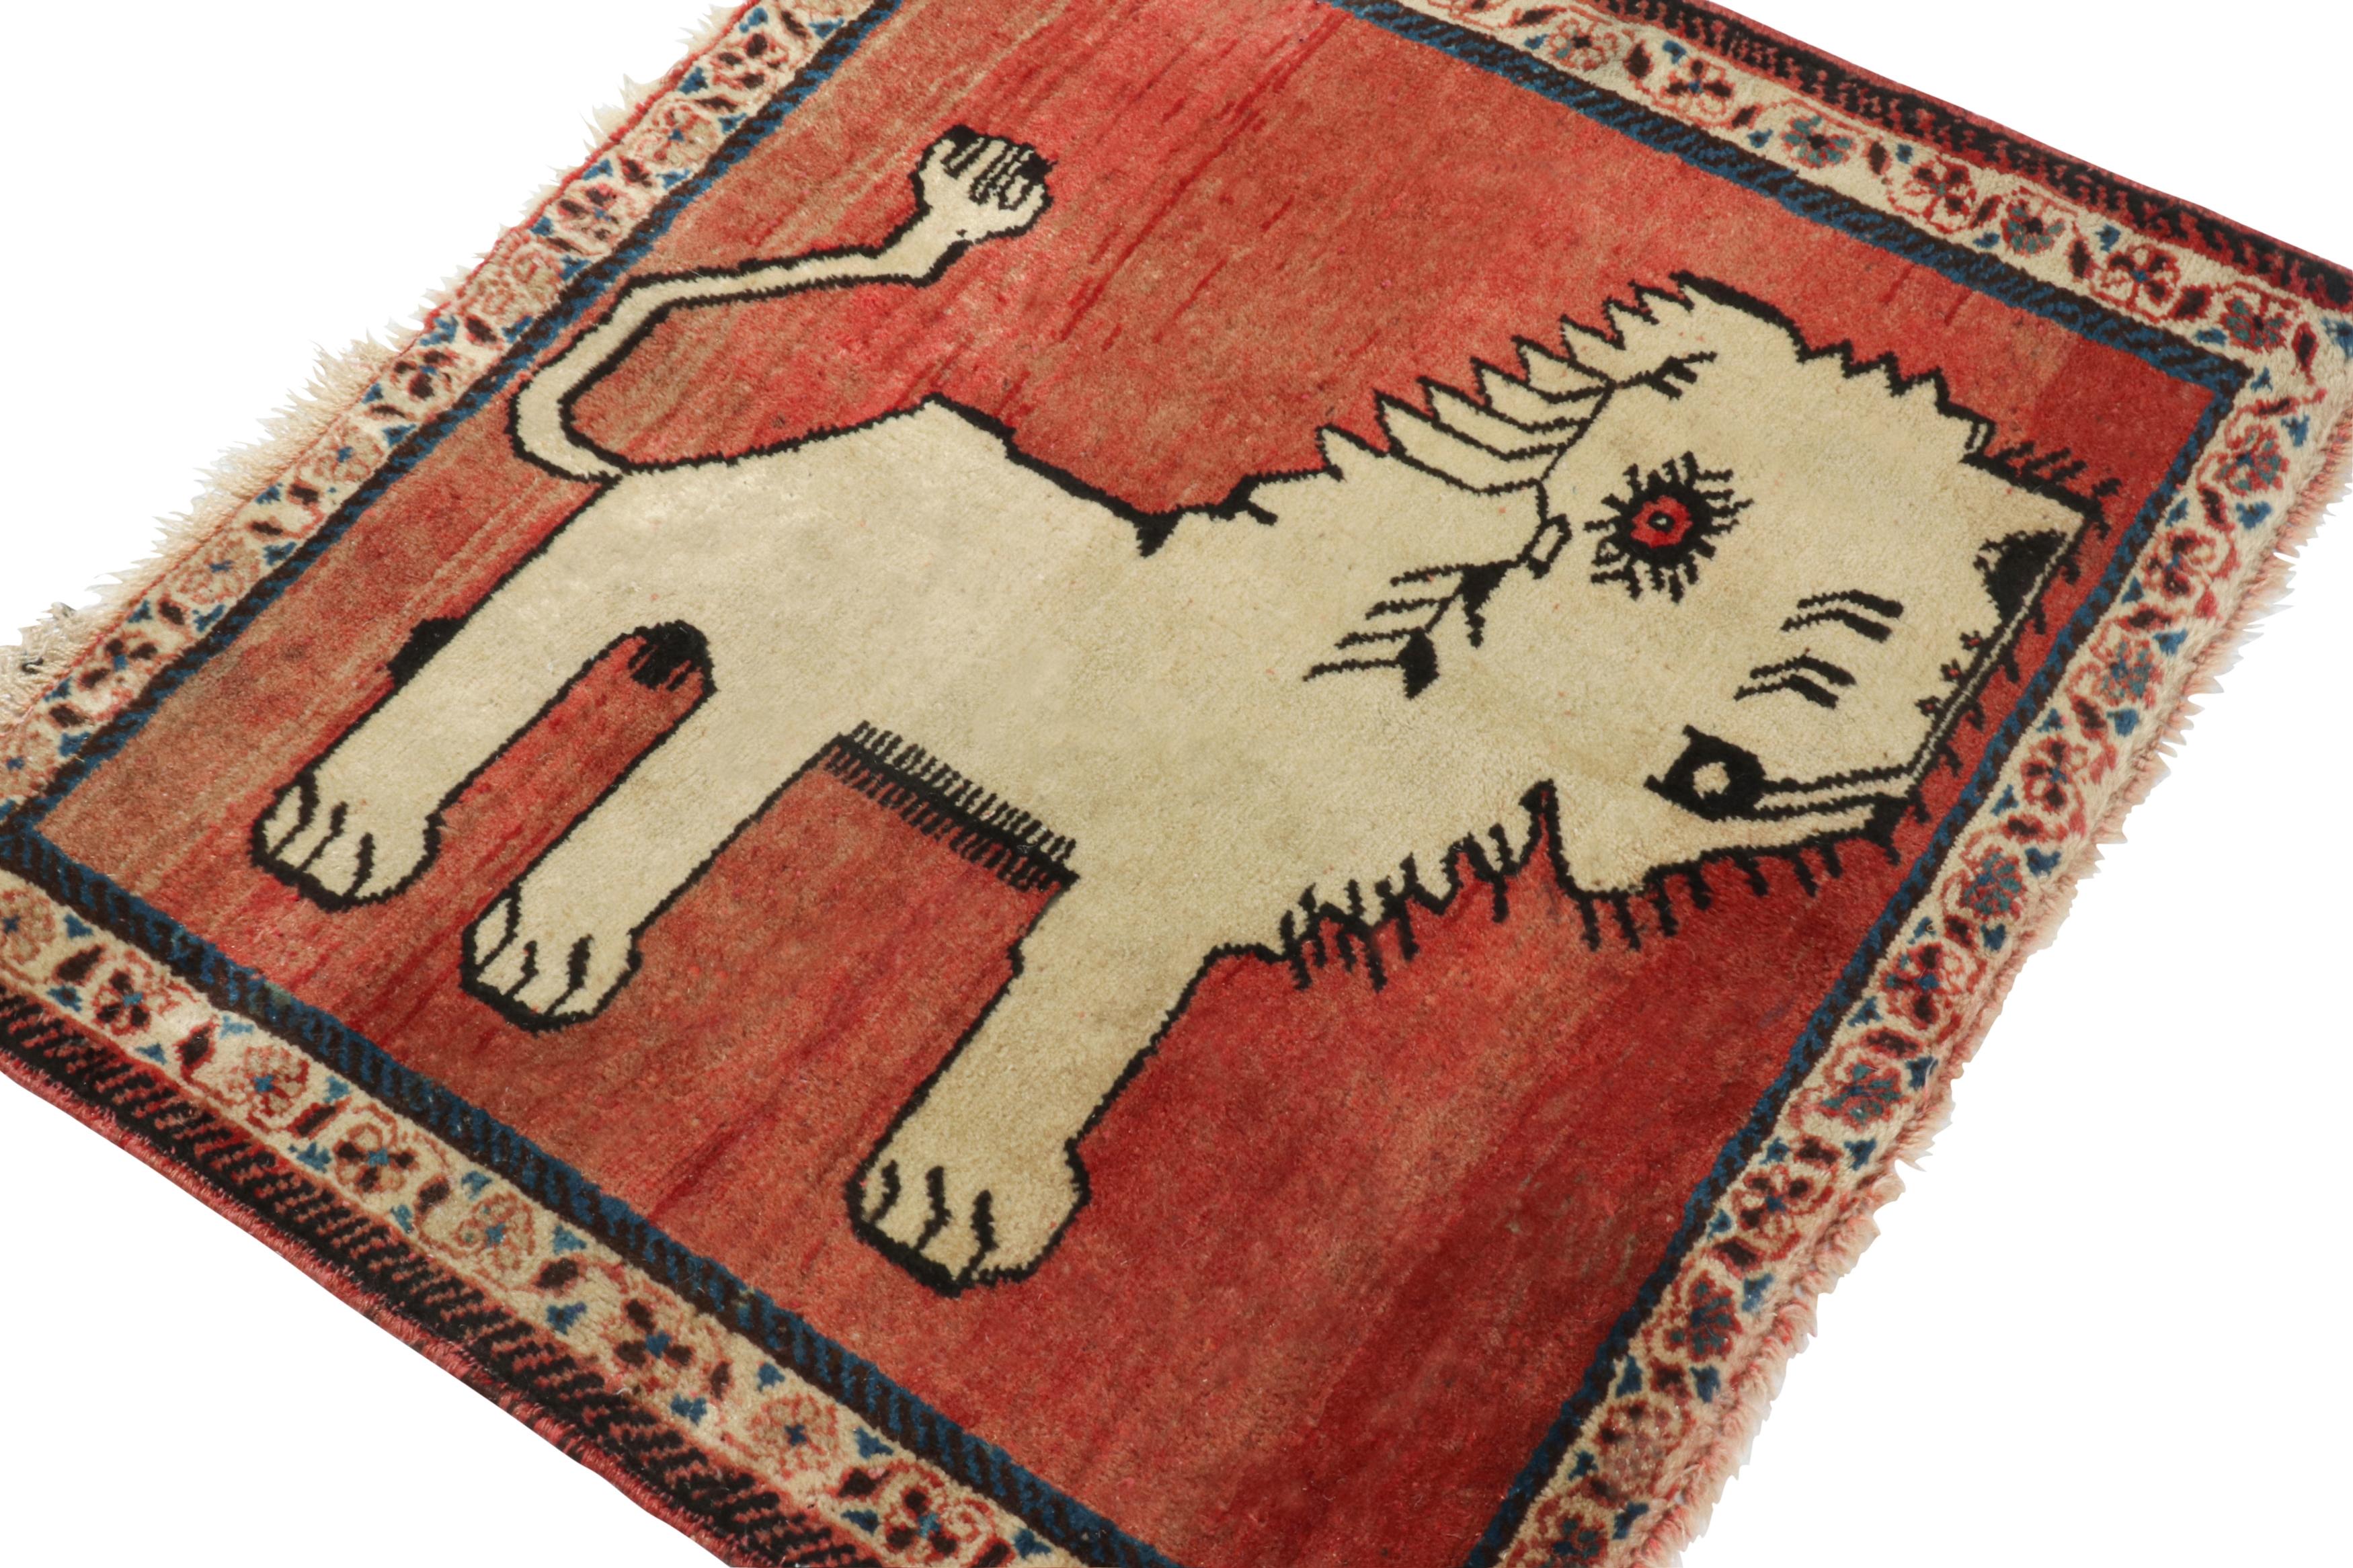 This vintage 2x2 Gabbeh Persian rug is from the latest entries in Rug & Kilim’s rare tribal curations. Hand-knotted in wool circa 1950-1960.

Further on the design:

This tribal provenance is one of the most primitive, and collectible shabby-chic